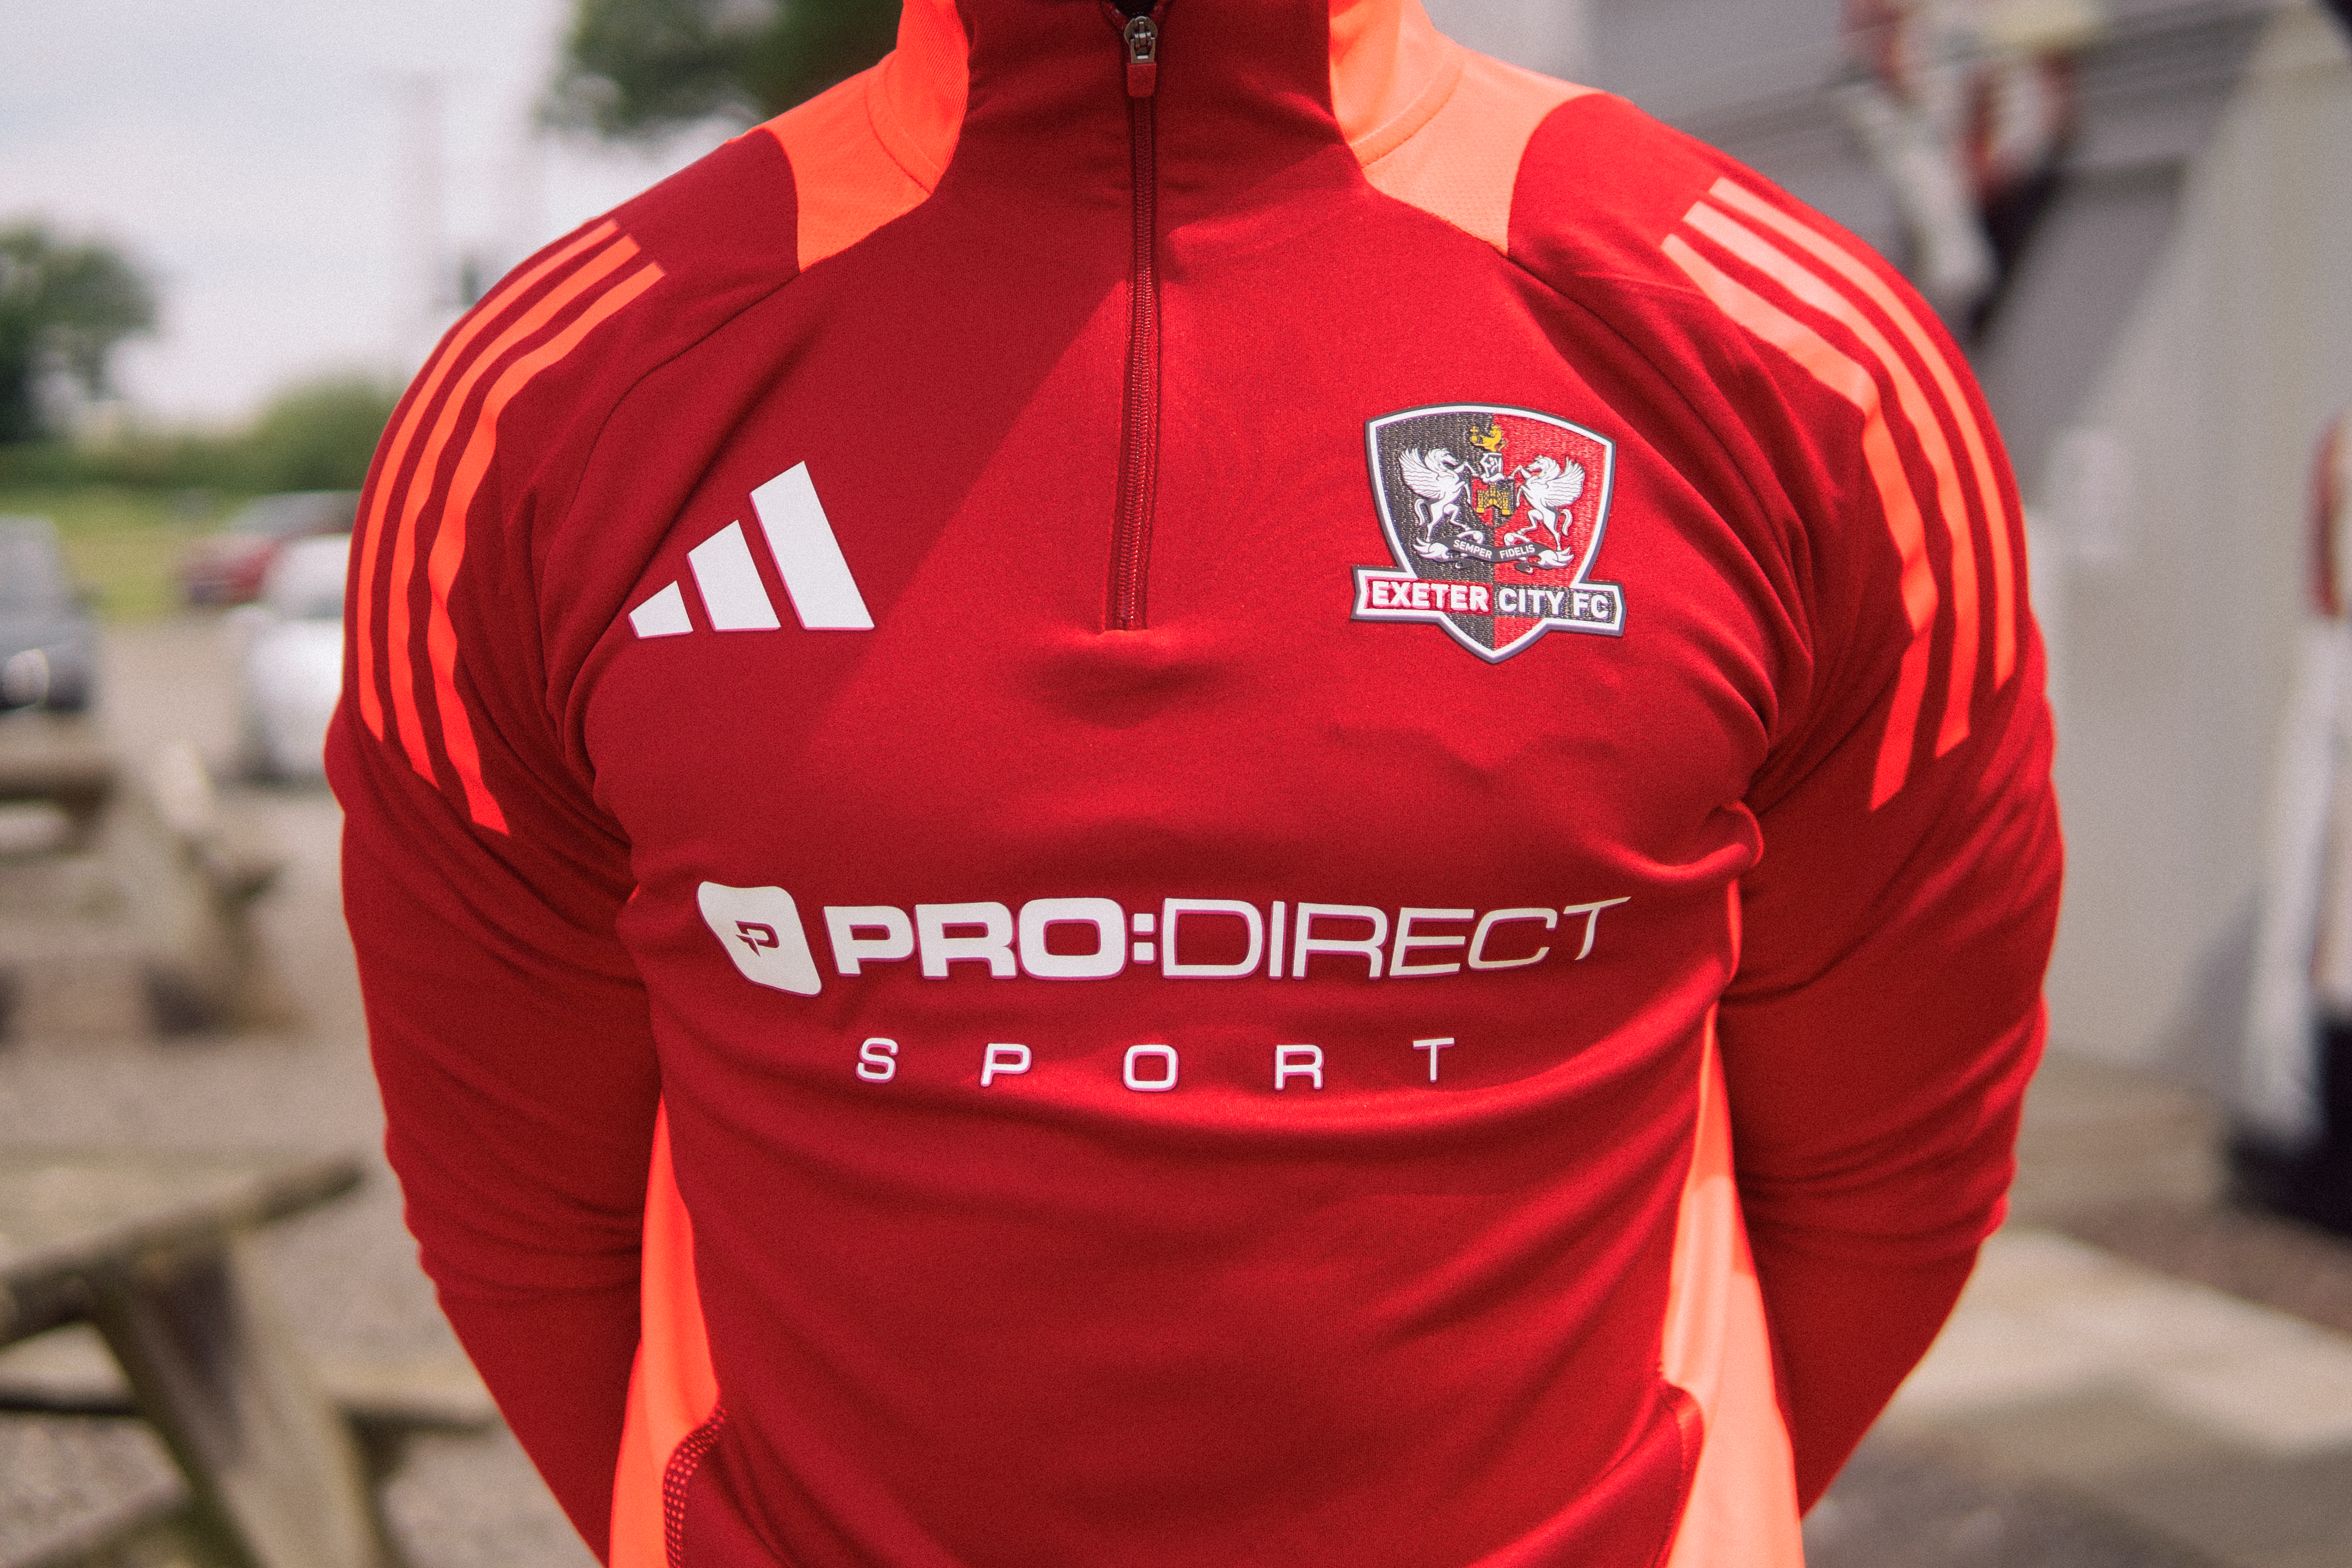 Close up of a red Exeter City training top with the Pro:Direct logo